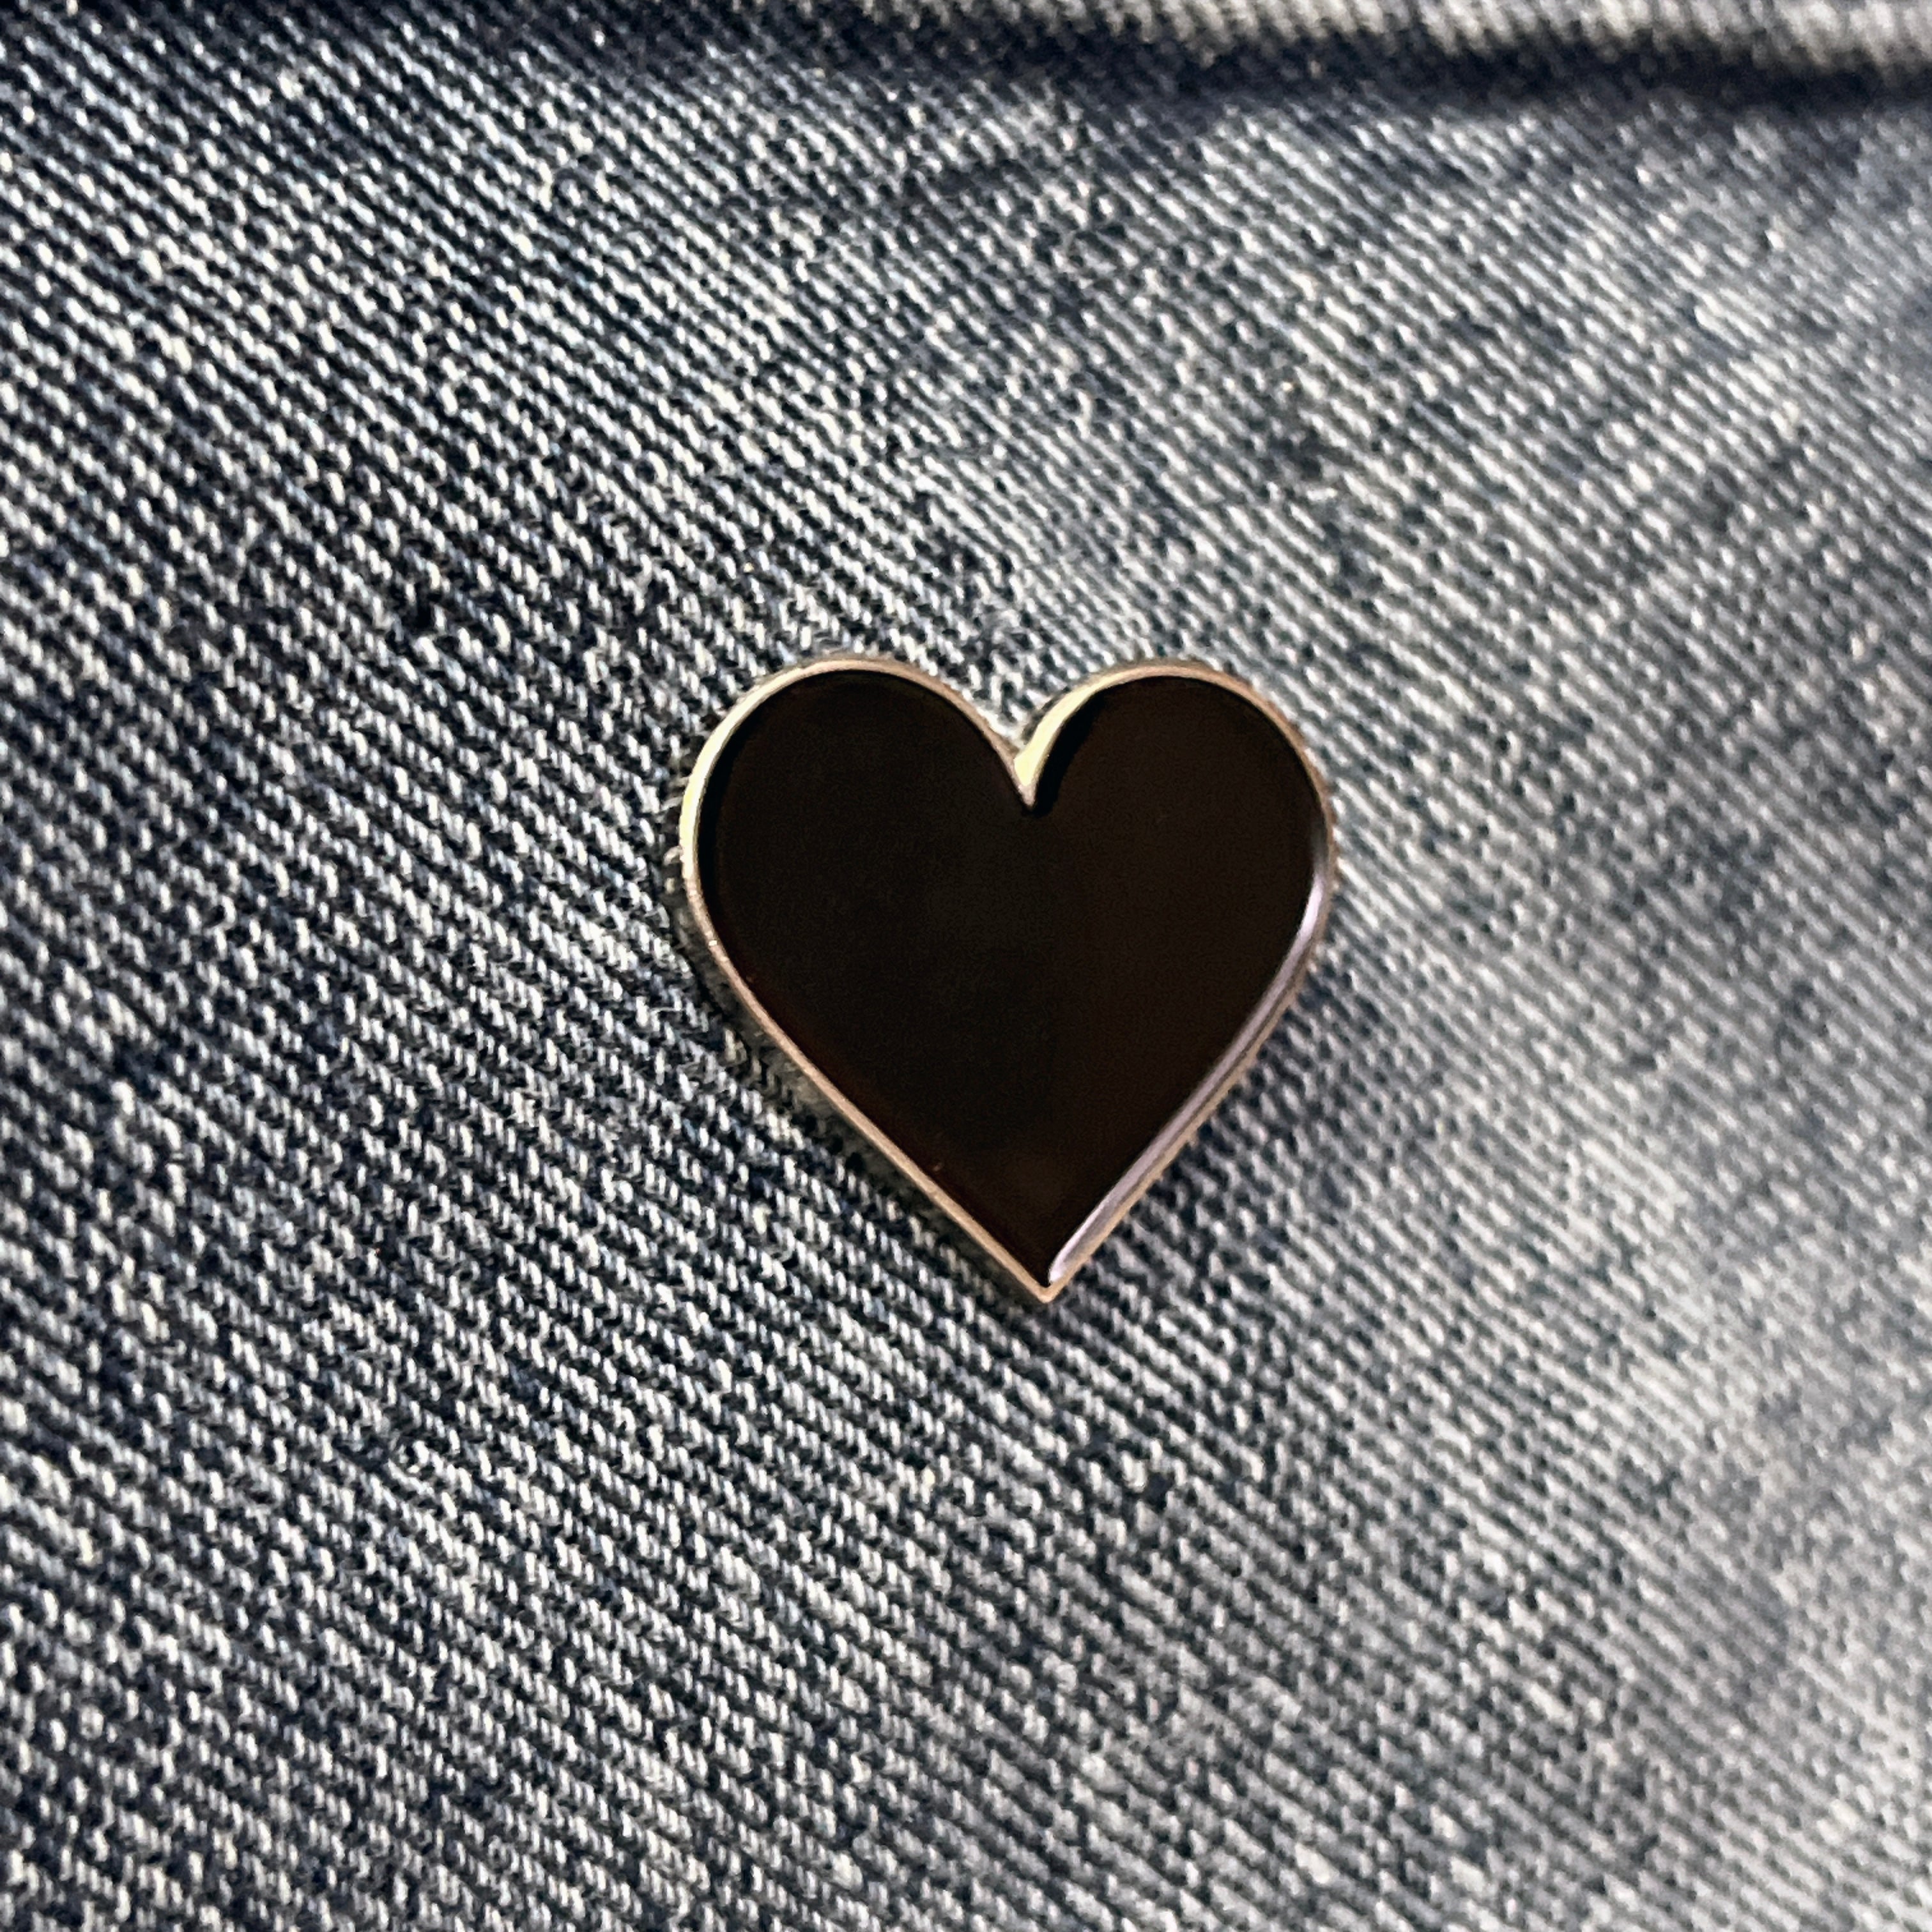 Metal & Enamel Black Heart Pin Badge with Secure Locking Back – PATCHERS